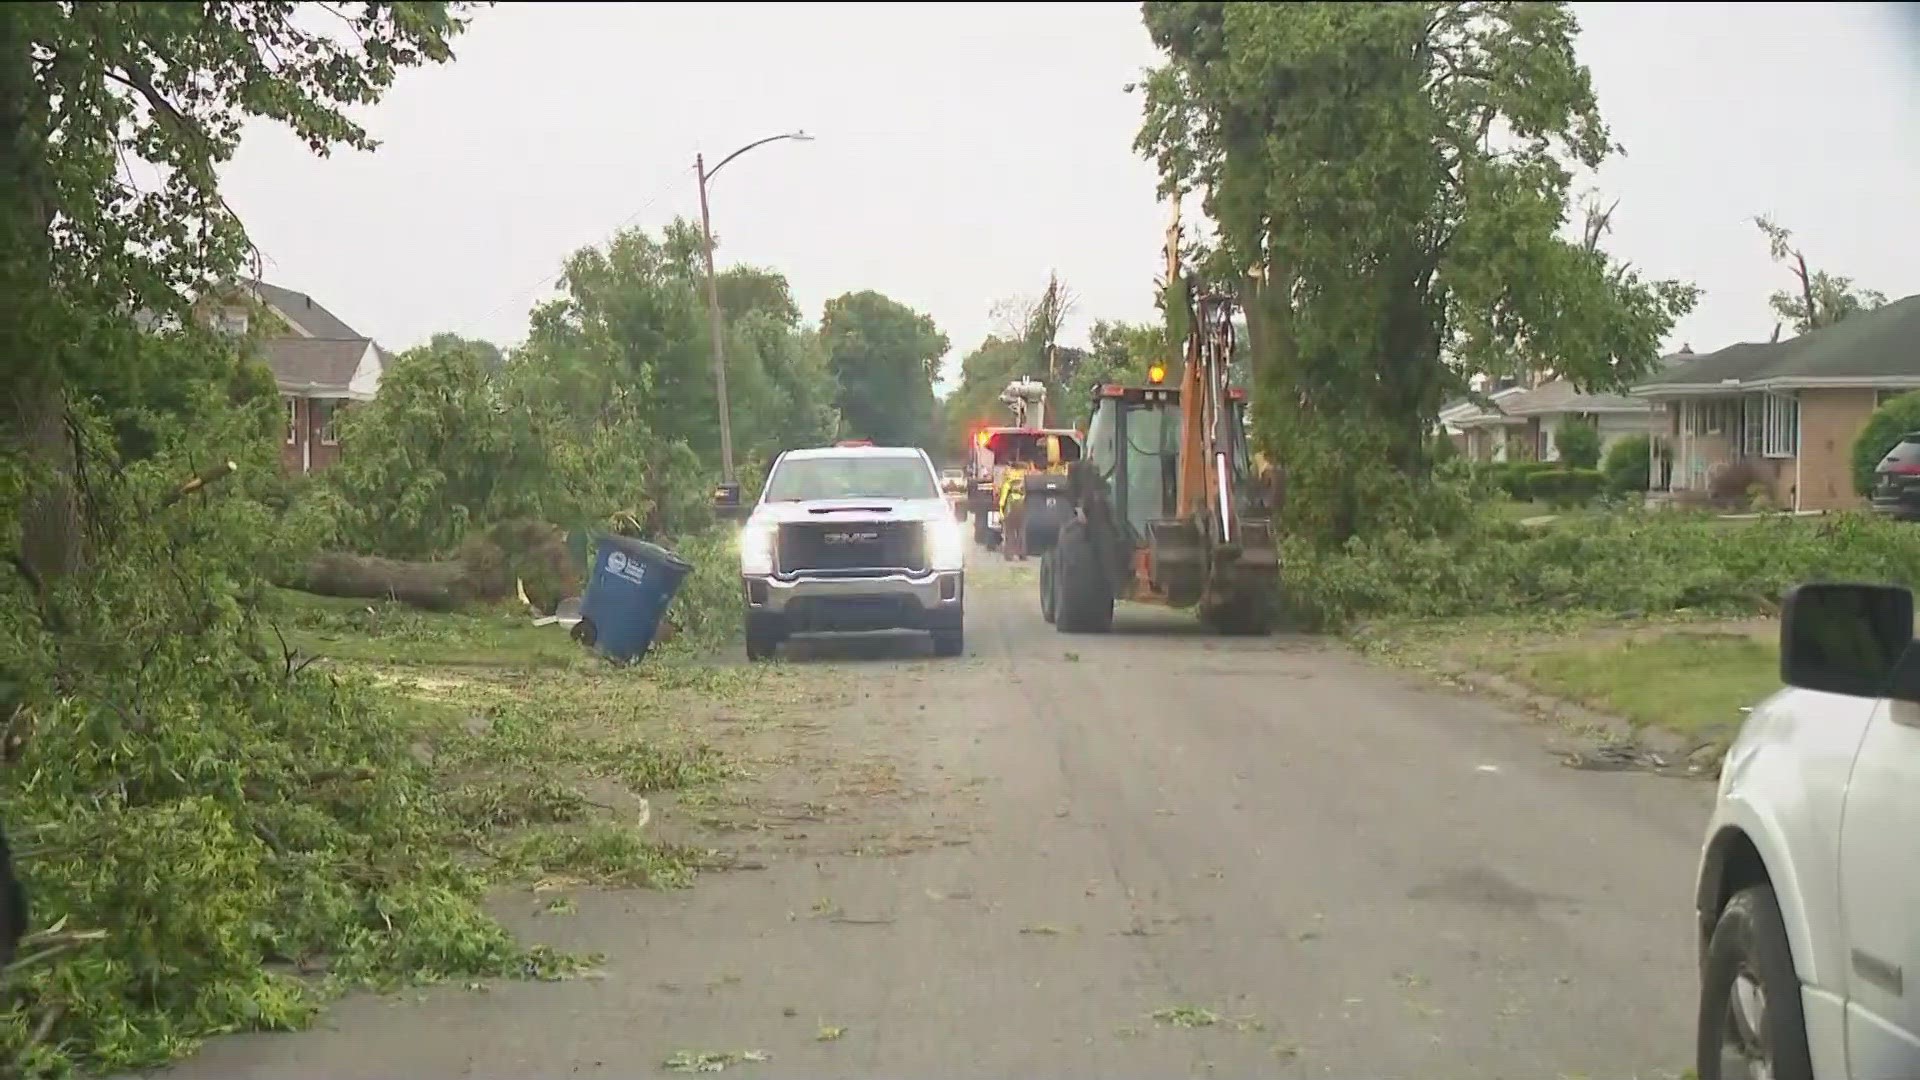 Clean up continues after tornado touches down in Toledo